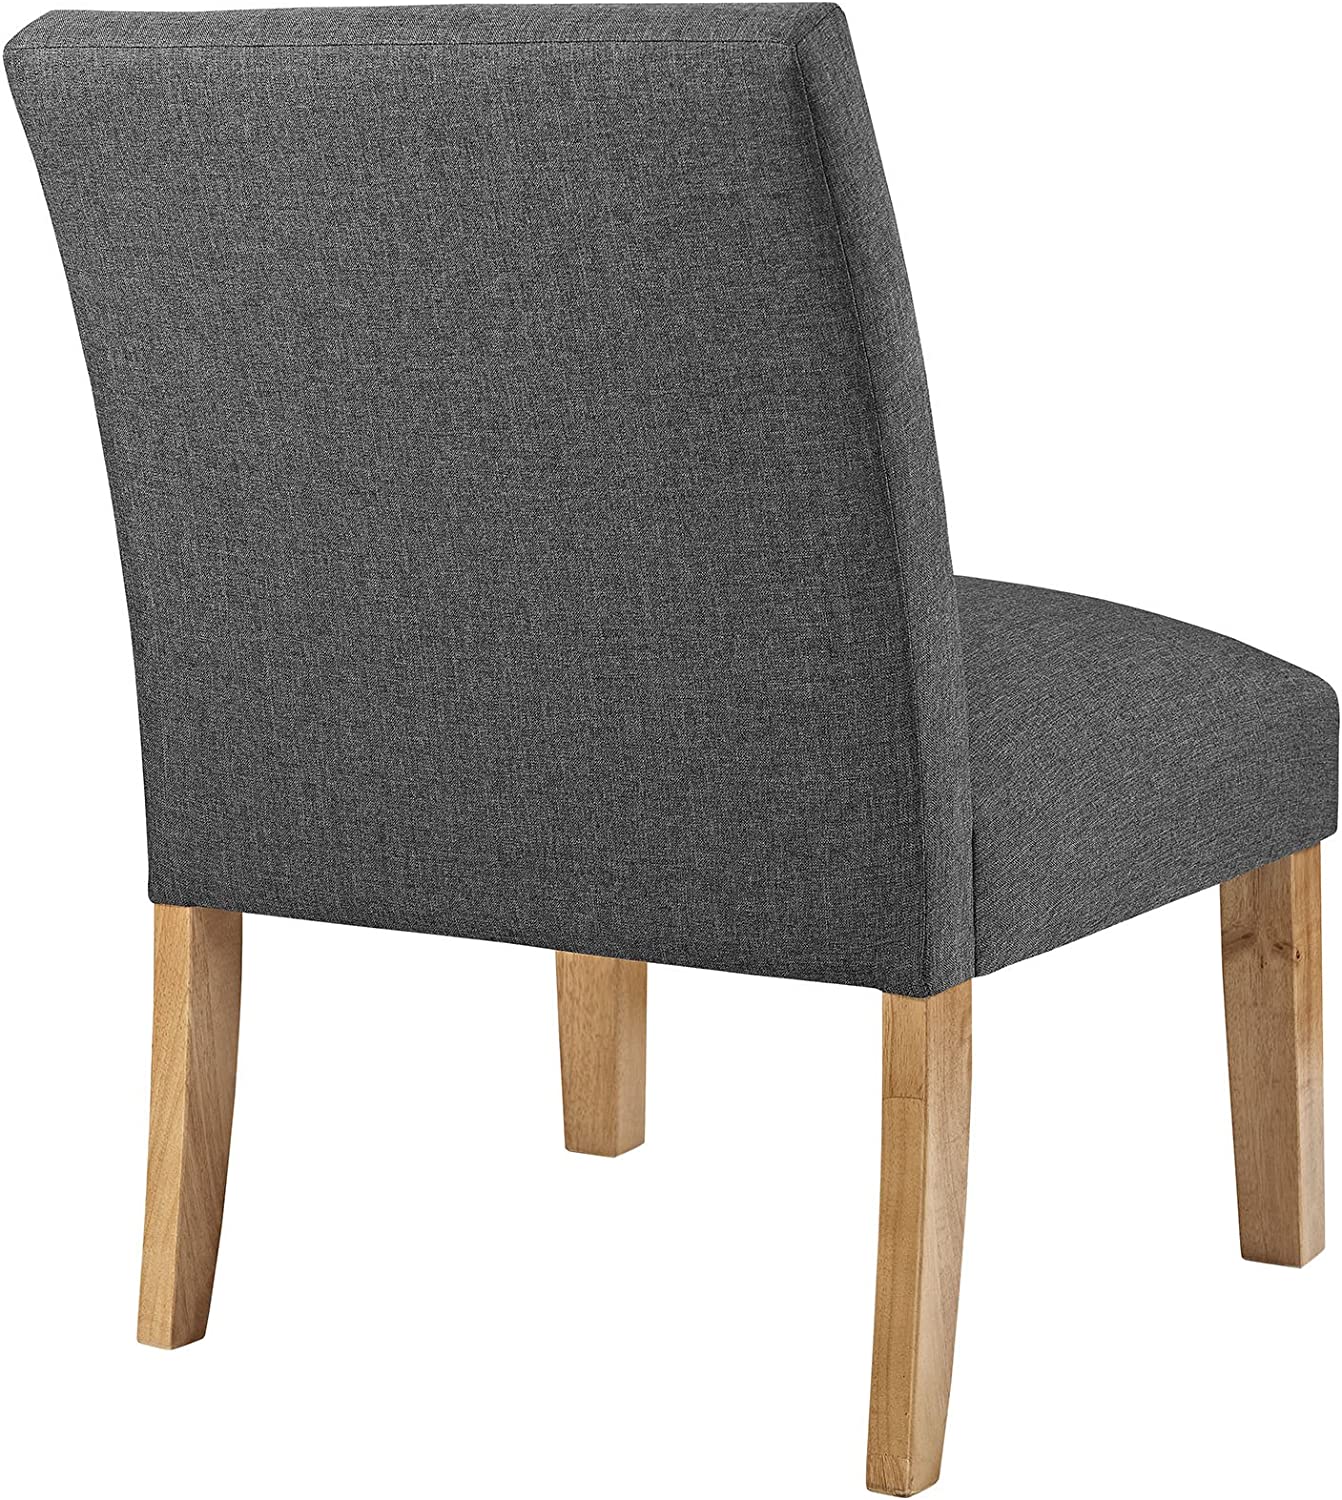 Modway Auteur Fabric Armchair in Gray